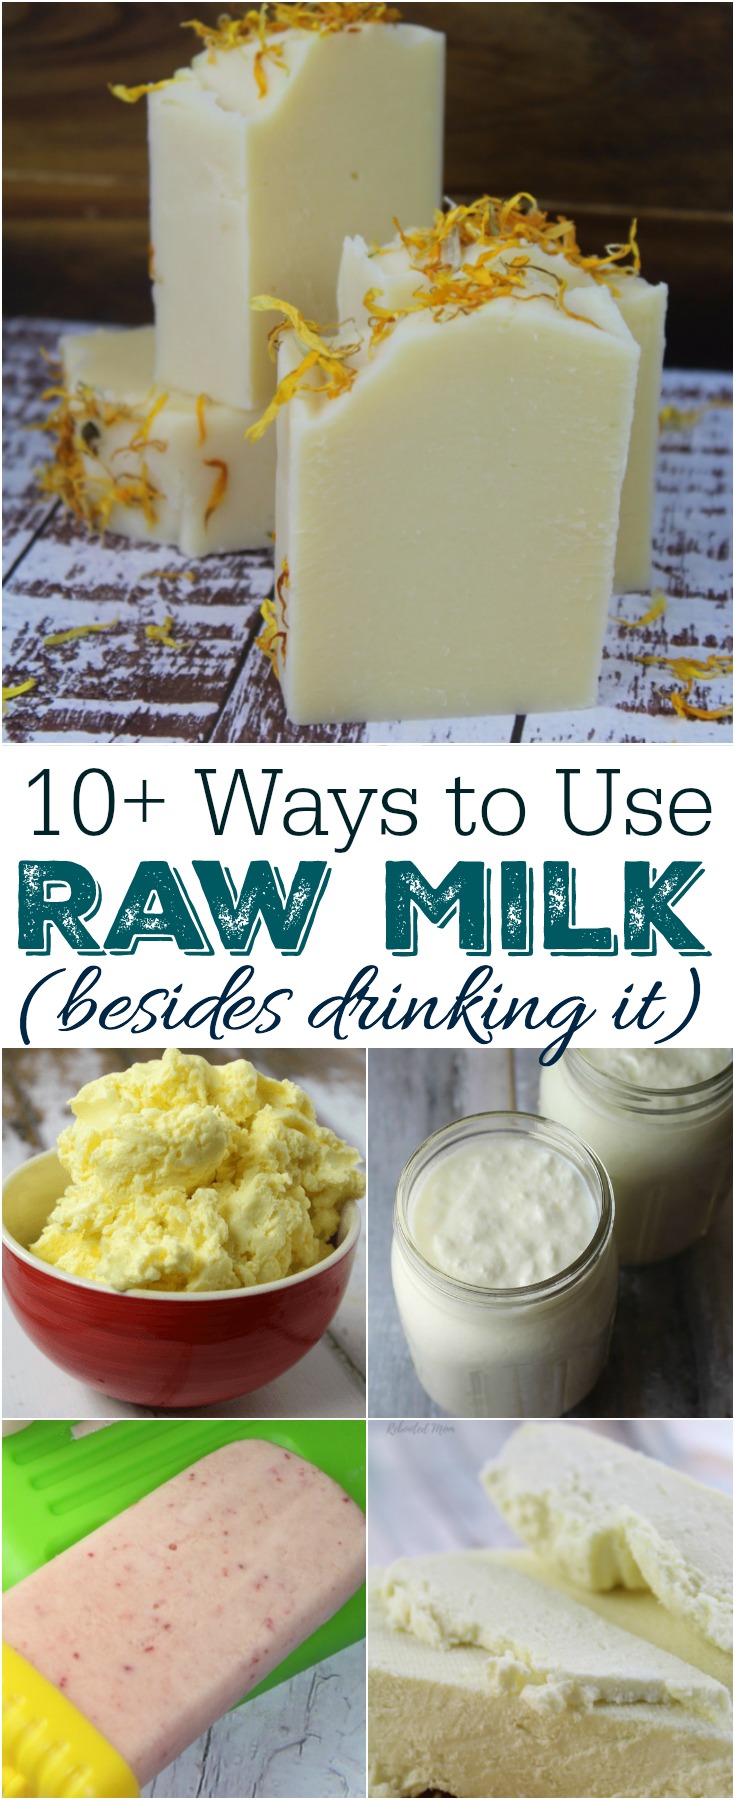 There is no question that raw milk is incredible for your health - here are over ten ways to use raw milk (besides drinking it, of course!) #rawmilk #milk #coldprocesssoap #soapmaking